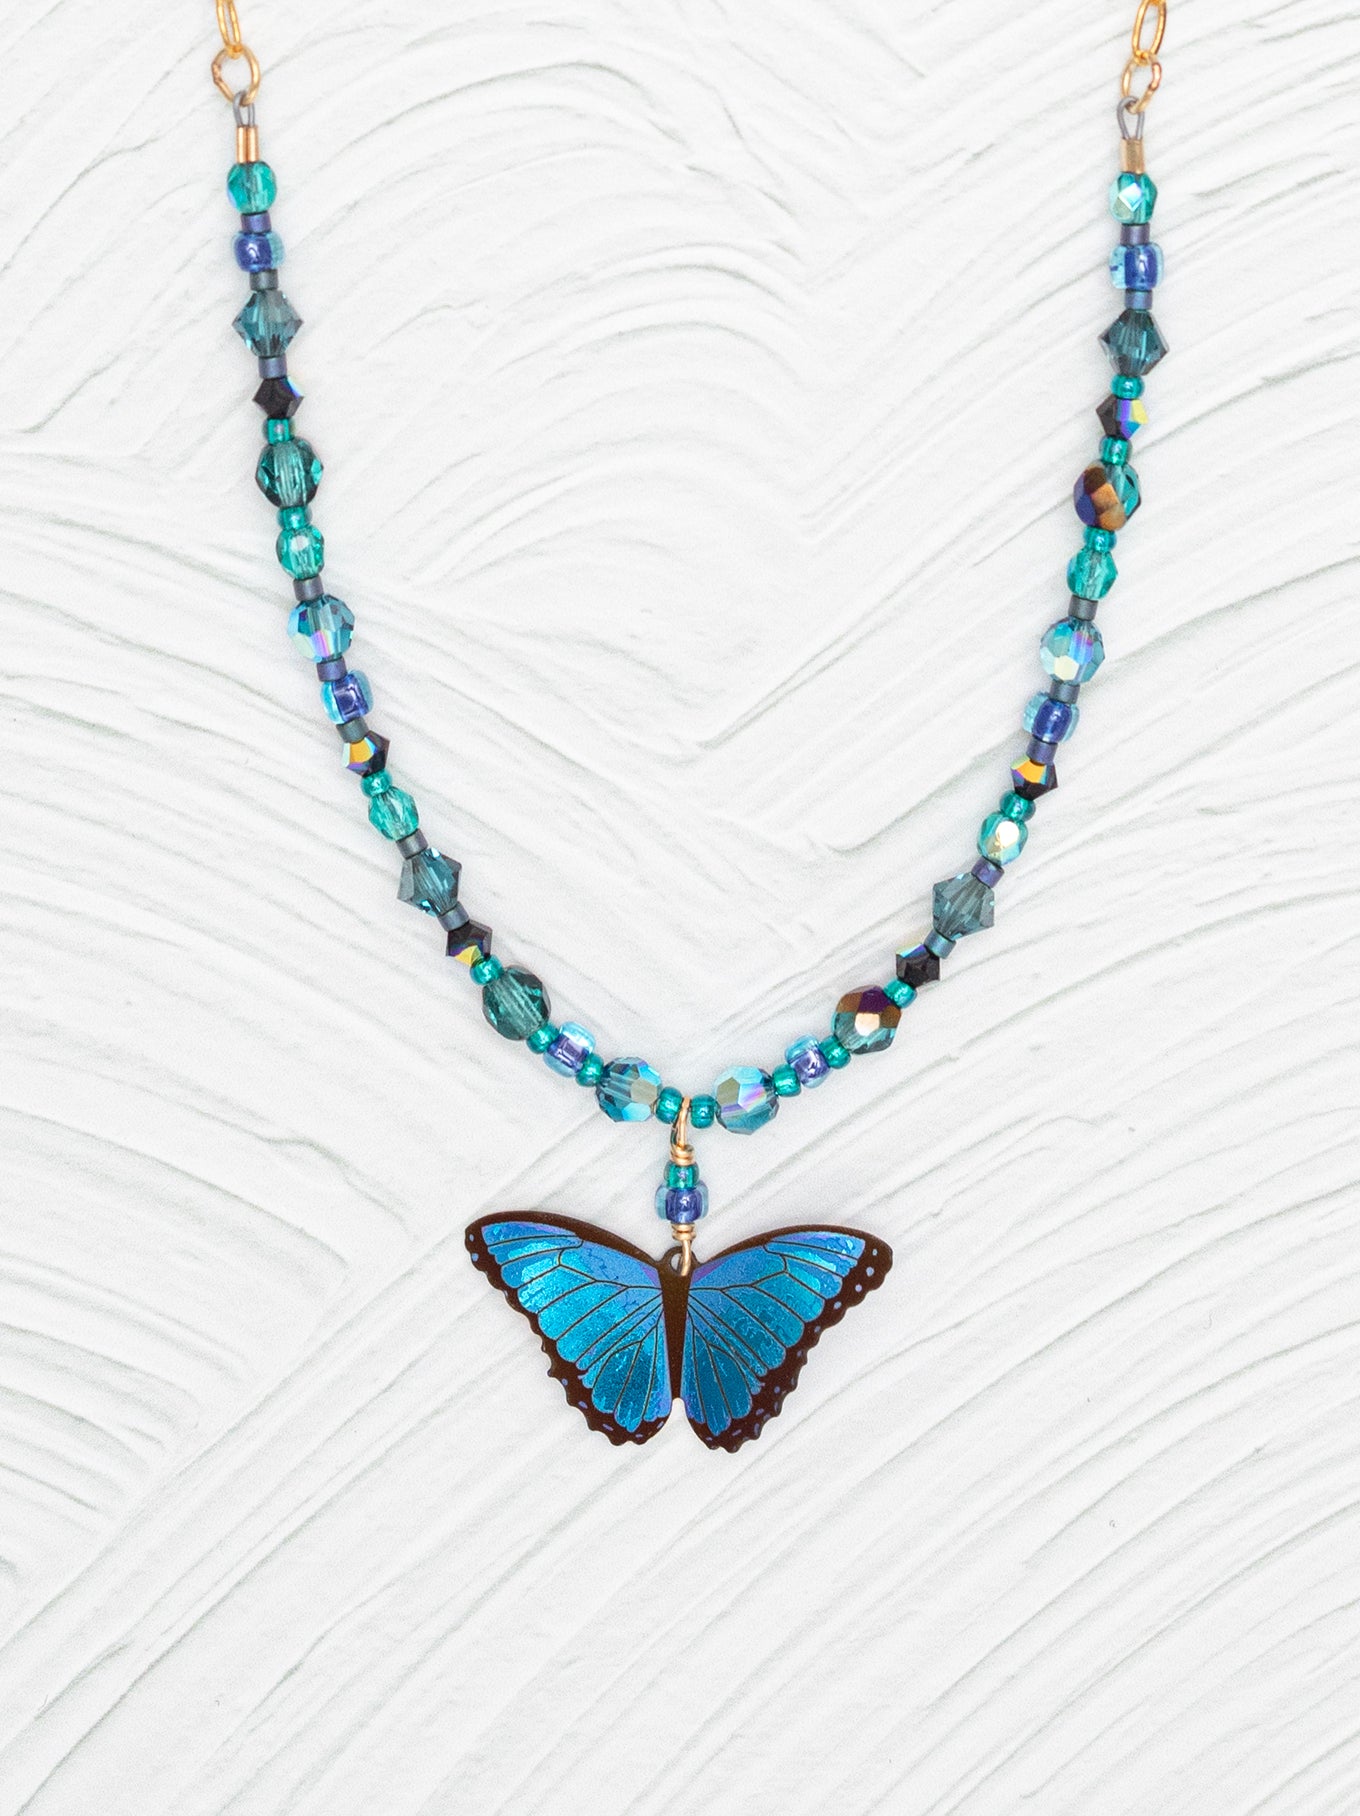 Common Blue butterfly necklace